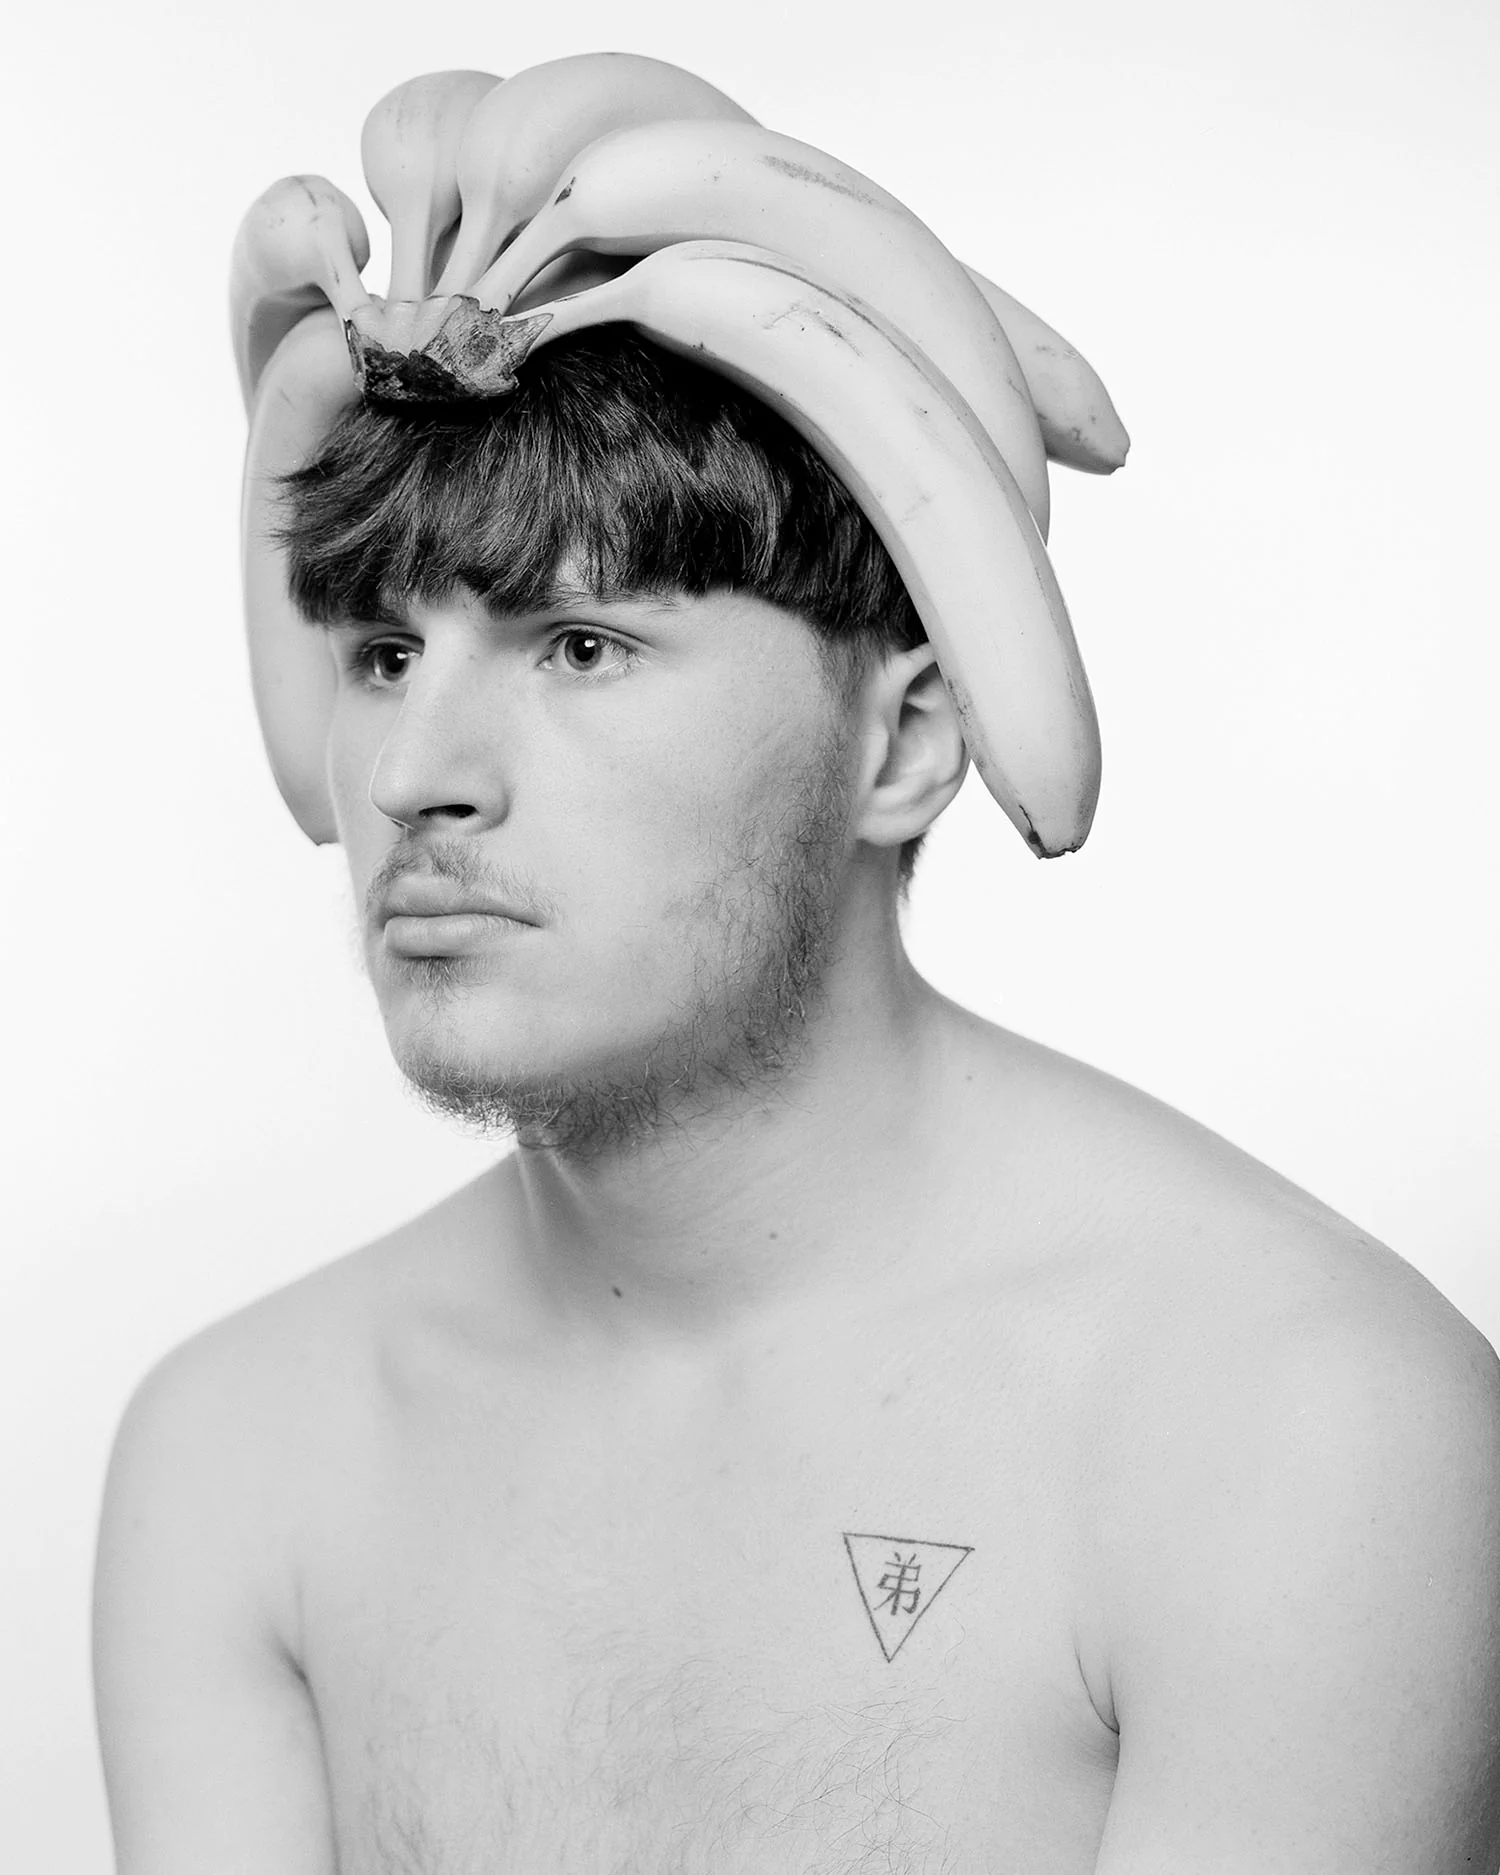 Large format black and white portrait of young man wearing bananas on head